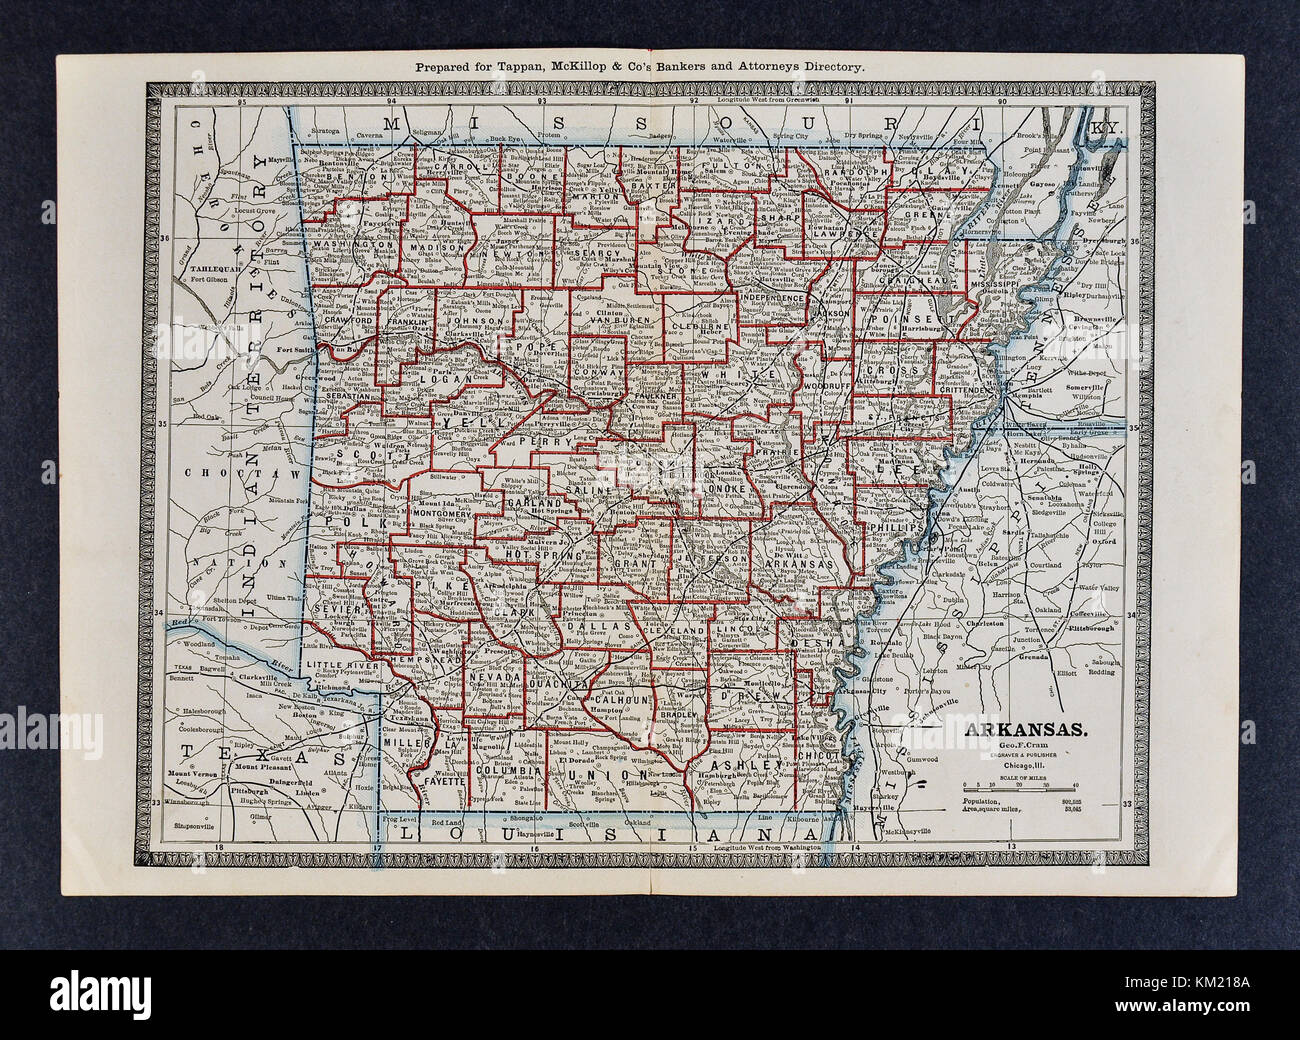 George Cram Antique Map from 1866 Atlas for Attorneys and Bankers: United States - Arkansas - Little Rock Hot Springs Fayetteville Jonesboro Stock Photo